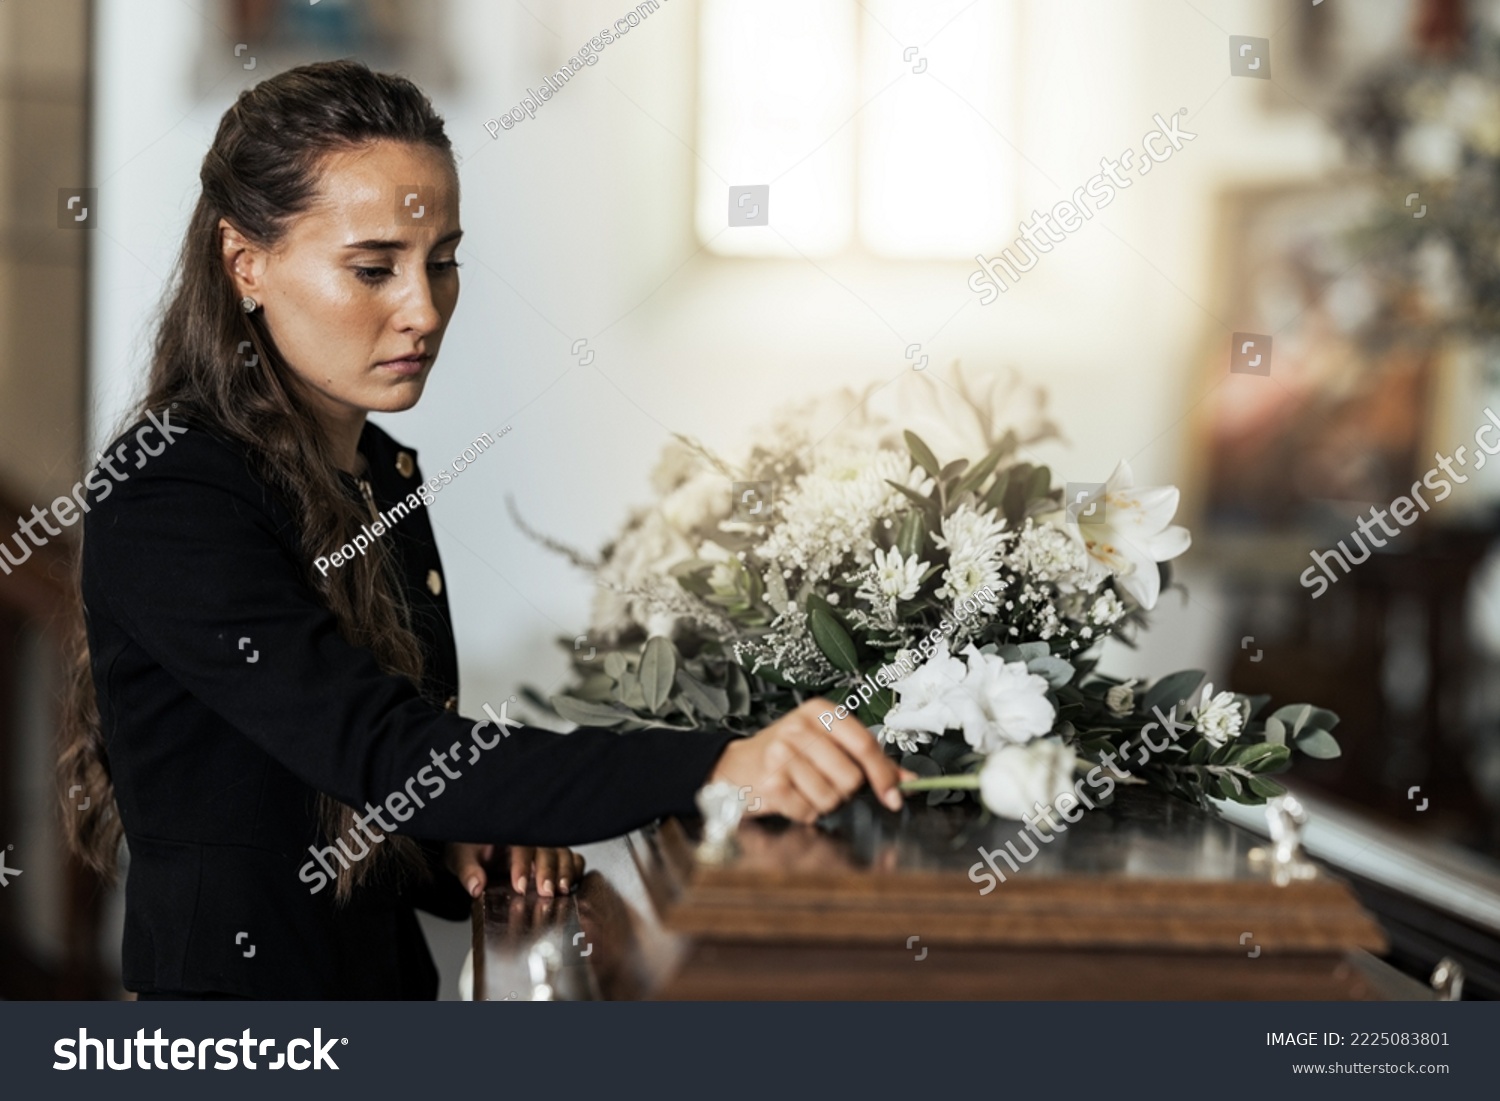 Funeral, sad and woman with flower on coffin after loss of a loved one, family or friend. Grief, death and young female putting a rose on casket in church with sadness, depression and mourning #2225083801